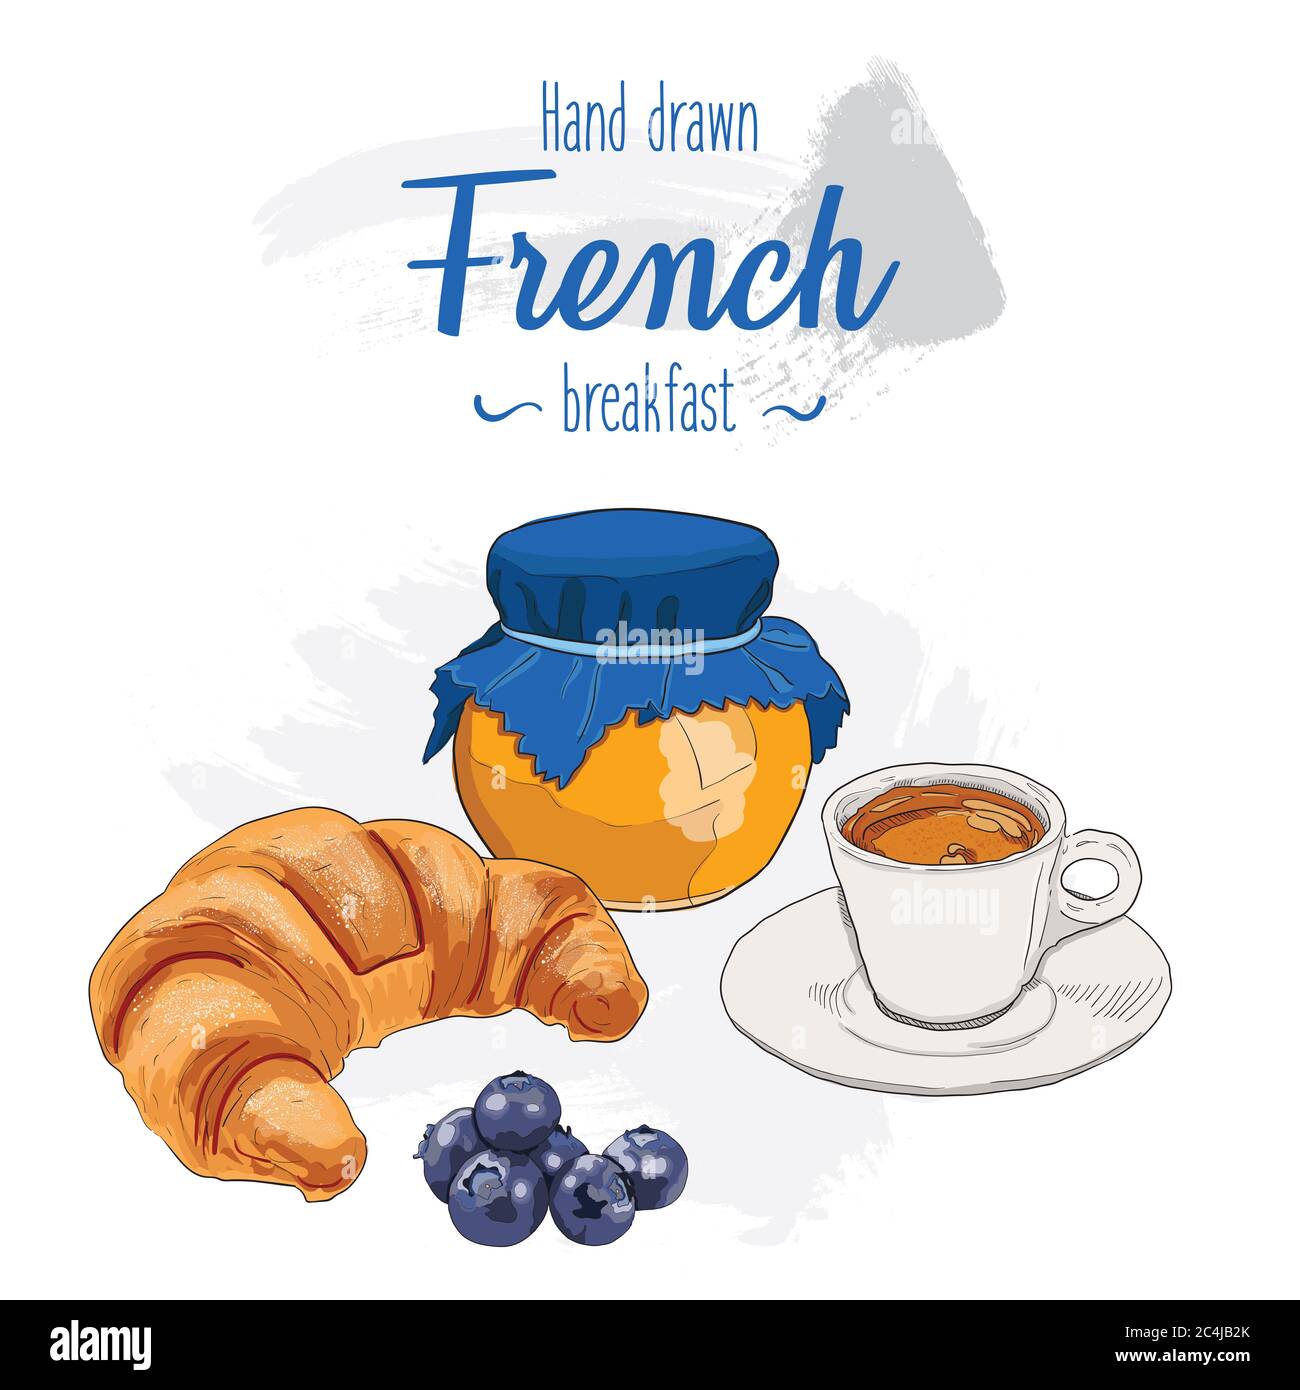 Hand drawn French breakfast menu. Croissant, espresso, jam and blueberries. Stock Photo